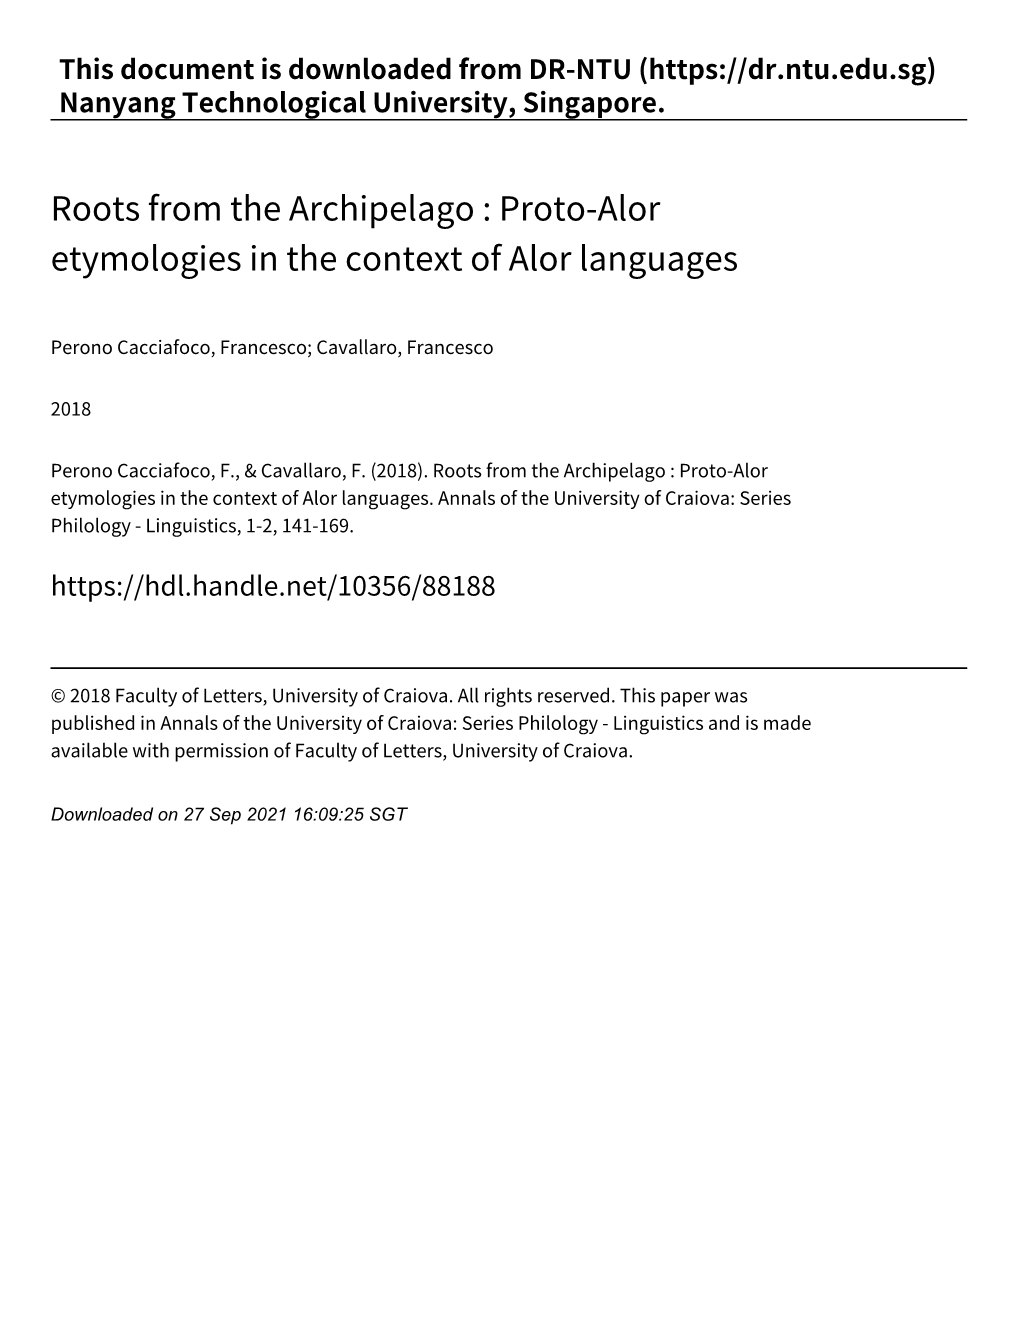 Proto‑Alor Etymologies in the Context of Alor Languages